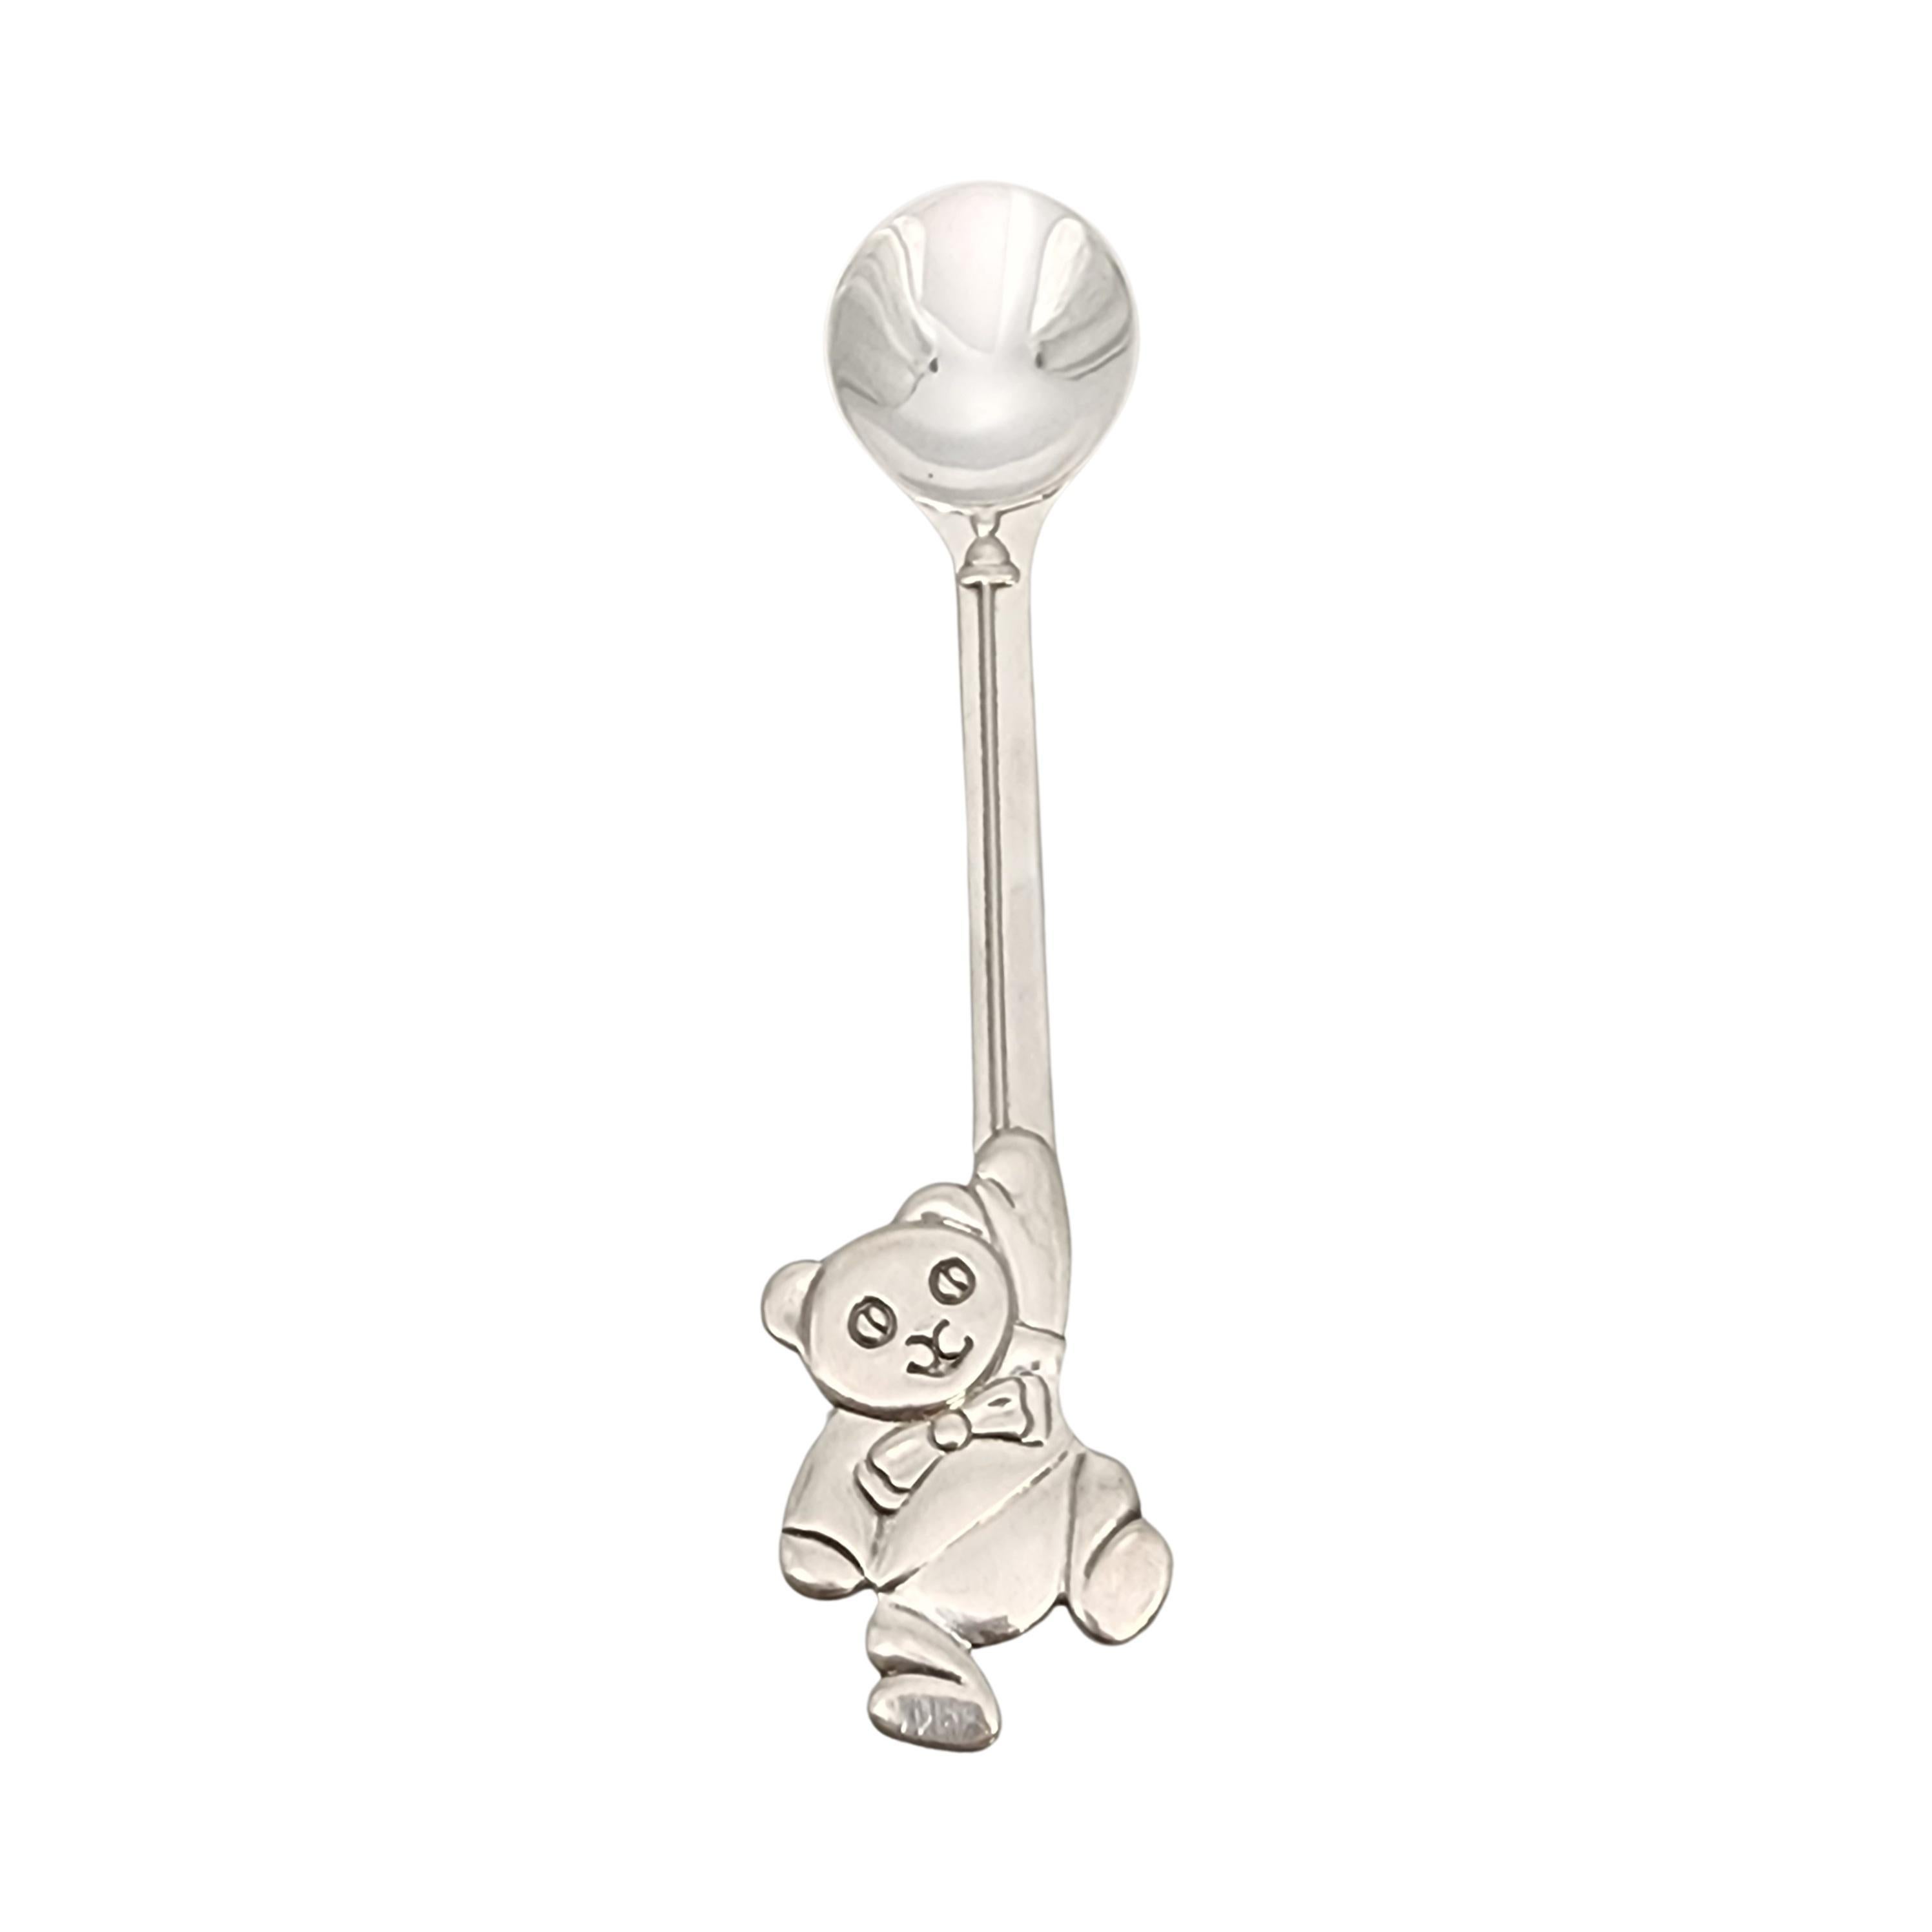 Tiffany & Co sterling silver Teddy Bear baby feeding spoon with pouch and box.

Authentic Tiffany & Co sterling silver baby spoon featuring a sweet teddy bear in a bow tie holding on to a balloon. Includes Tiffany & Co pouch and box.

Measures